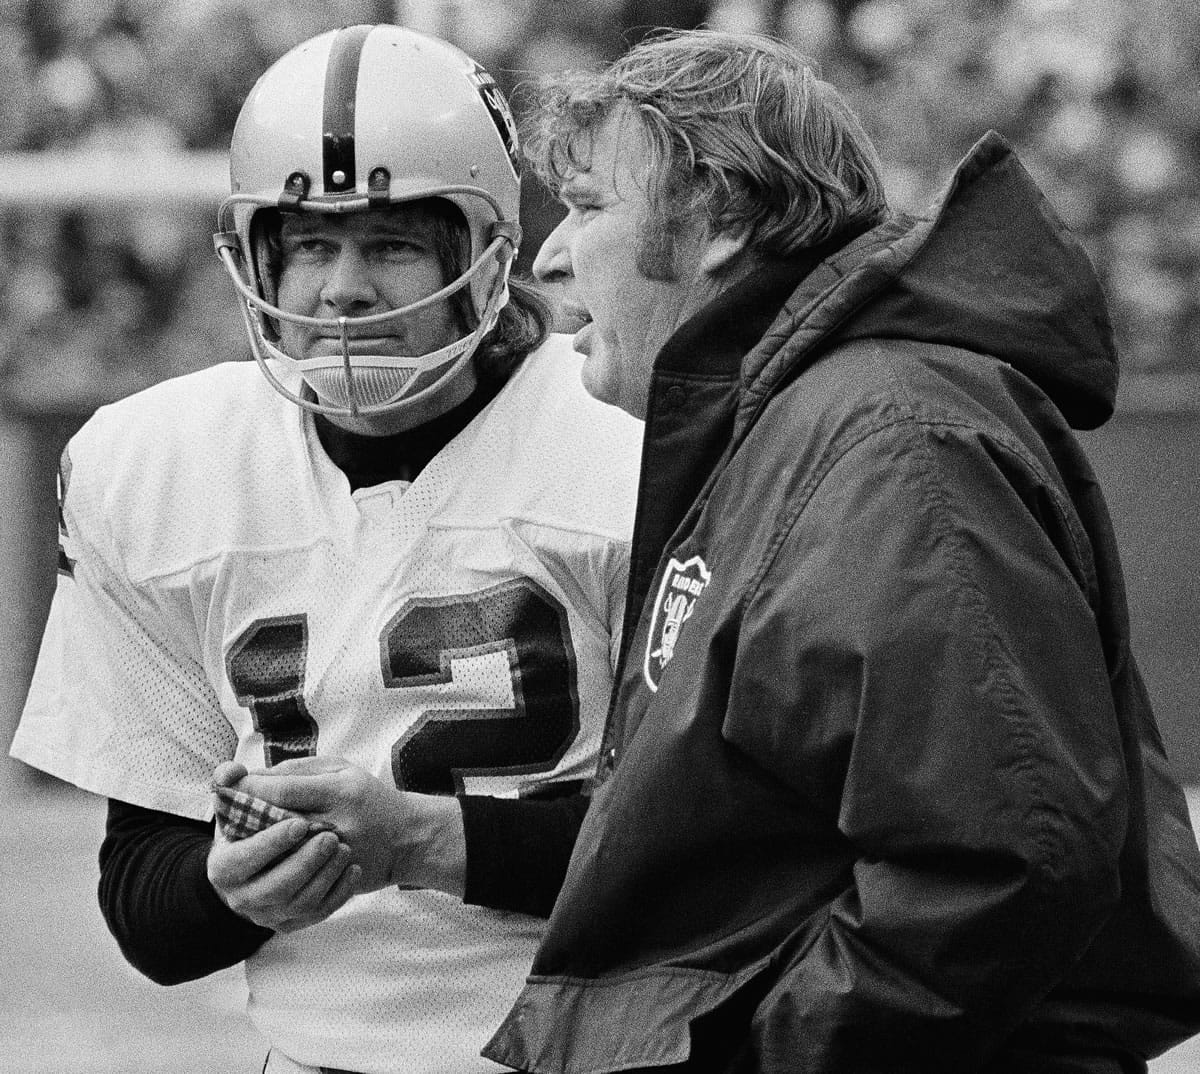 Oakland Raiders quarterback Ken Stabler, left, who led the Raiders to a Super Bowl victory and was the NFL's Most Valuable Player in 1974, died as a result of complications from colon cancer. He was 69. His family announced his death on Stabler's Facebook page on Thursday, July 9, 2015.